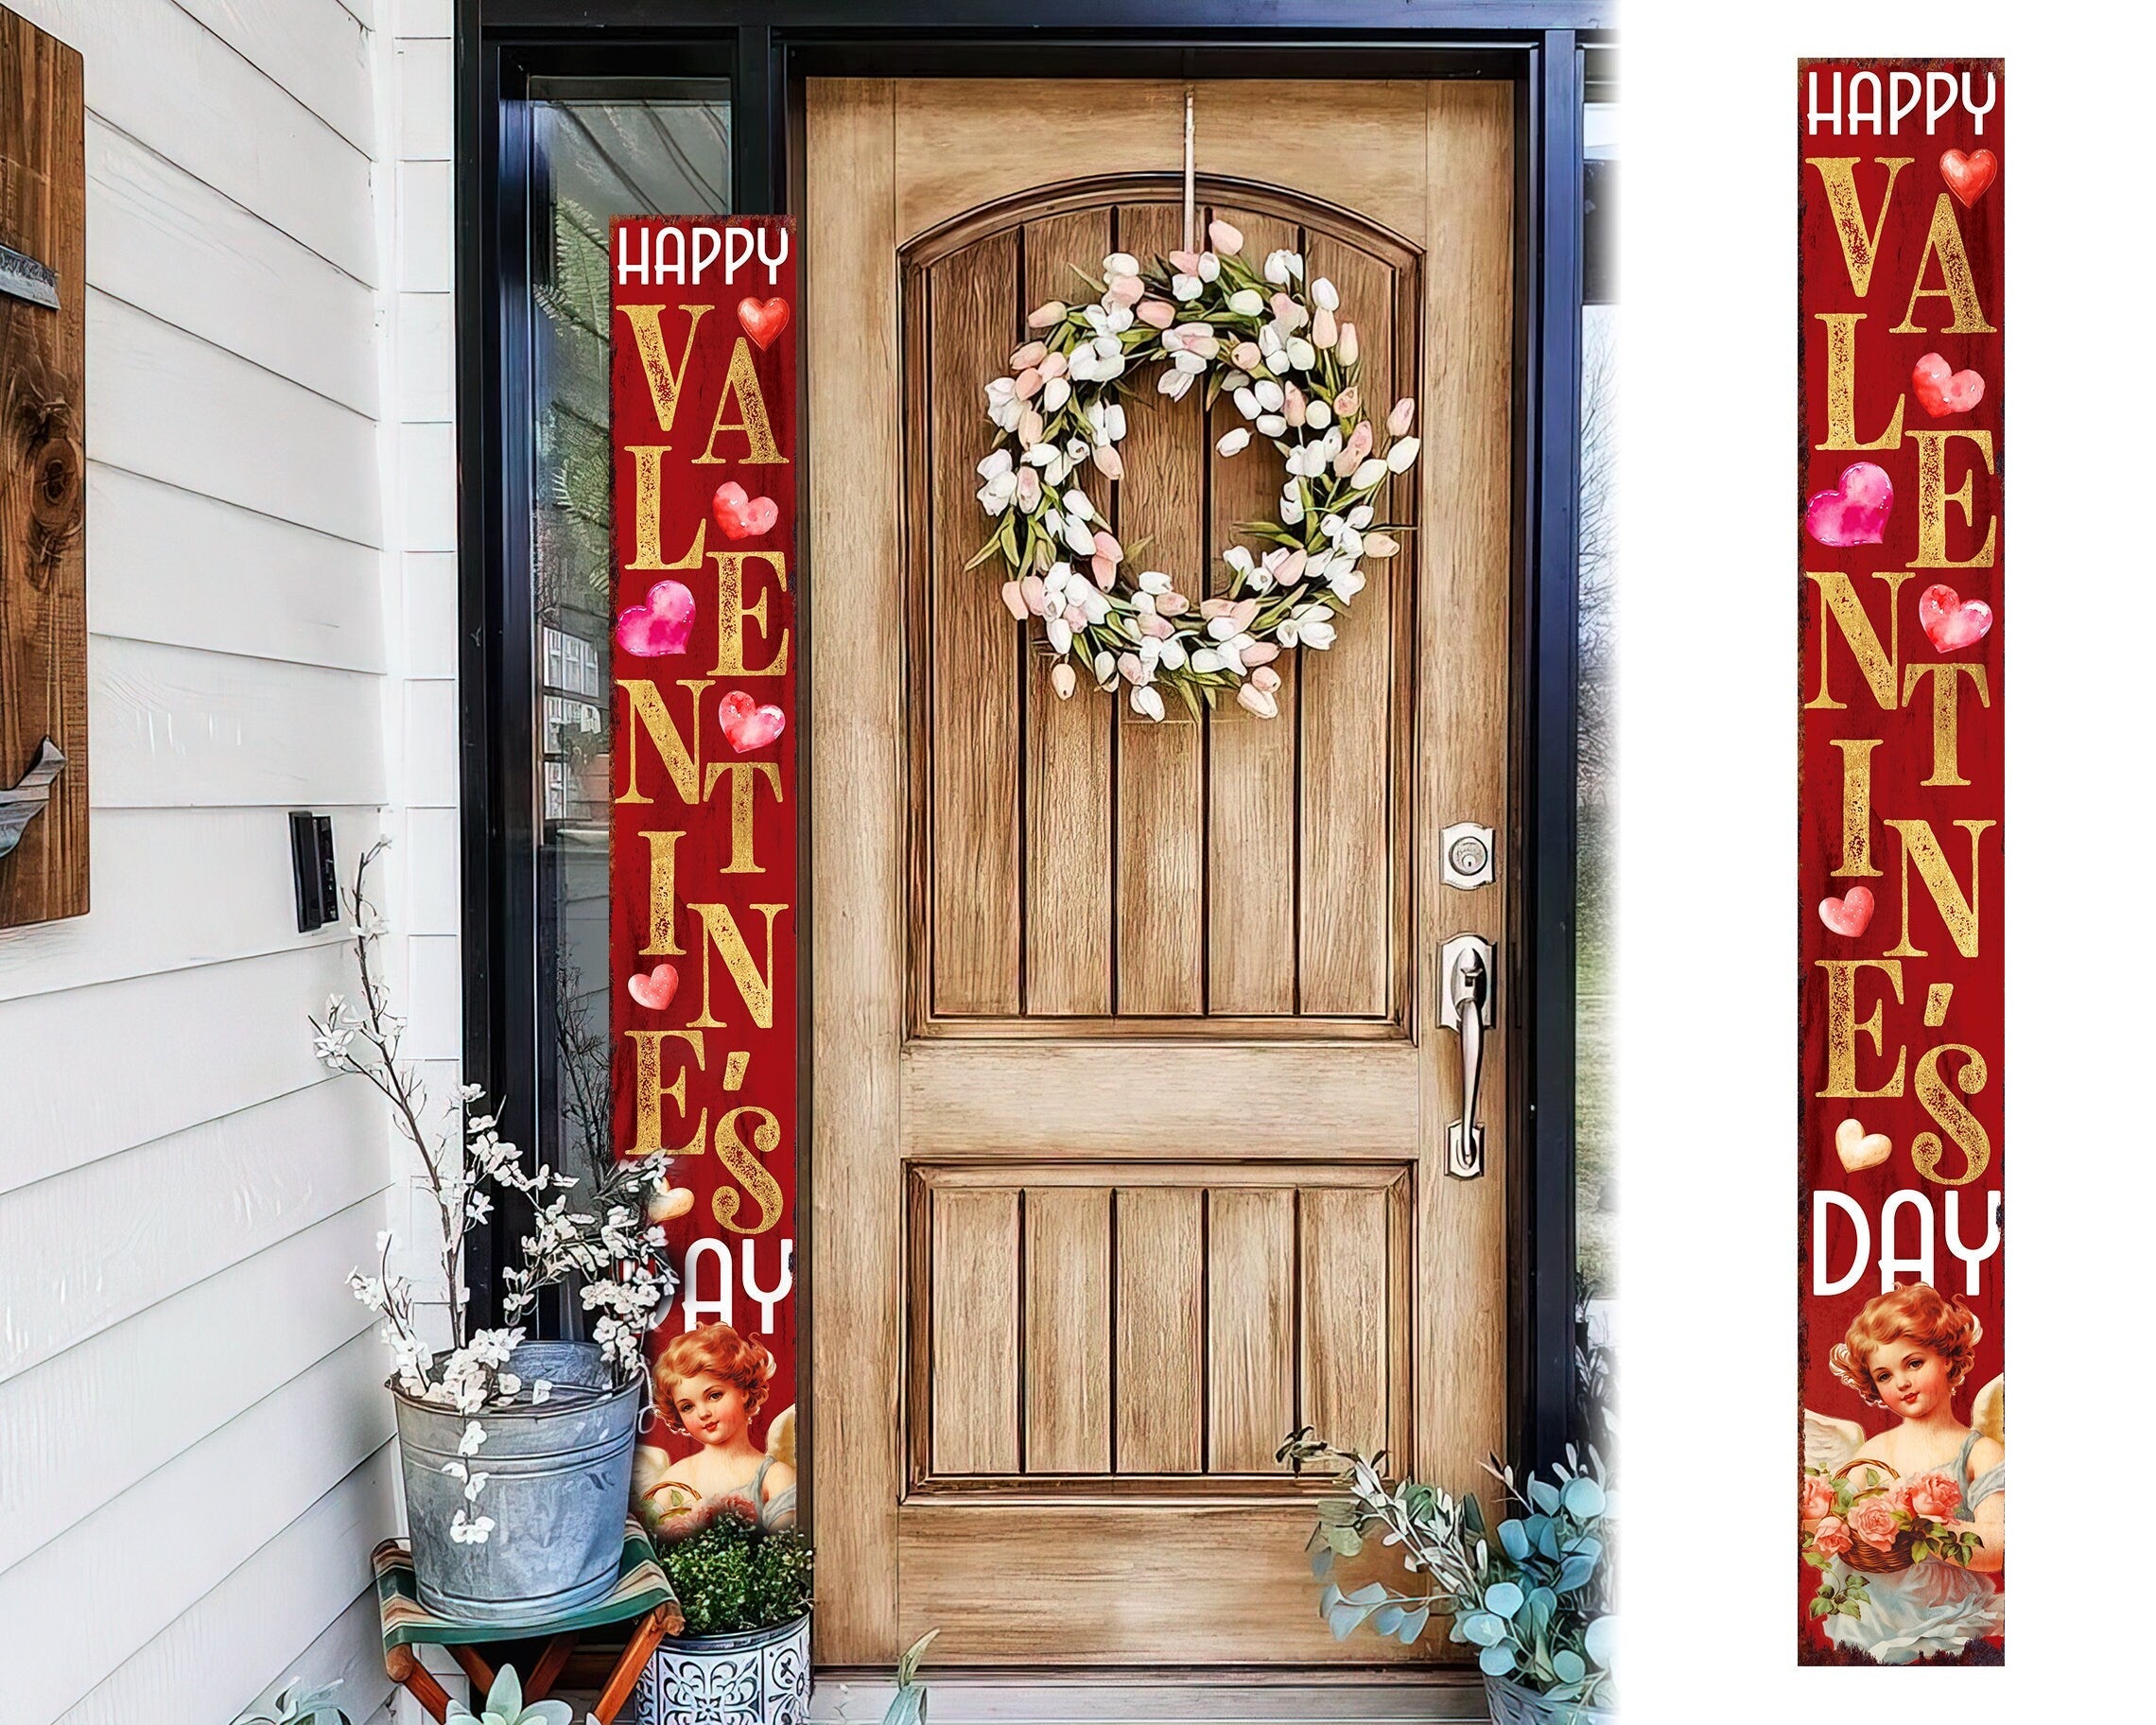 72IN-Happy-Valentine's-Day-Rustic-Modern-Farmhouse-Entryway-Welcome-Sign-for-Front-Porch,-Vintage-Valentine's-Outdoor-Decor-for-Front-Door-